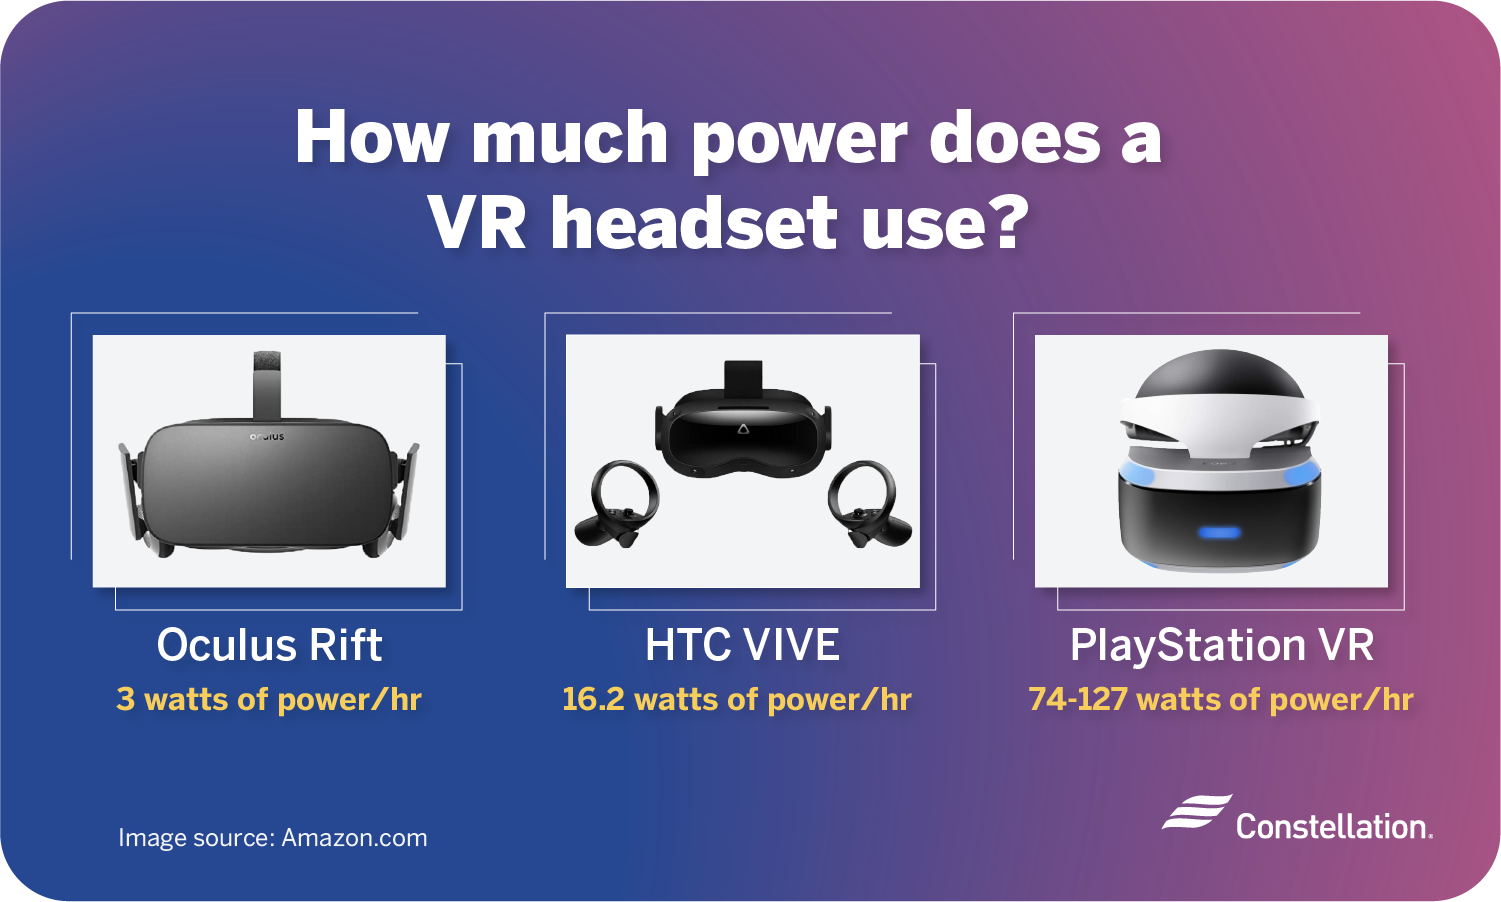 How much power does a VR headset use?